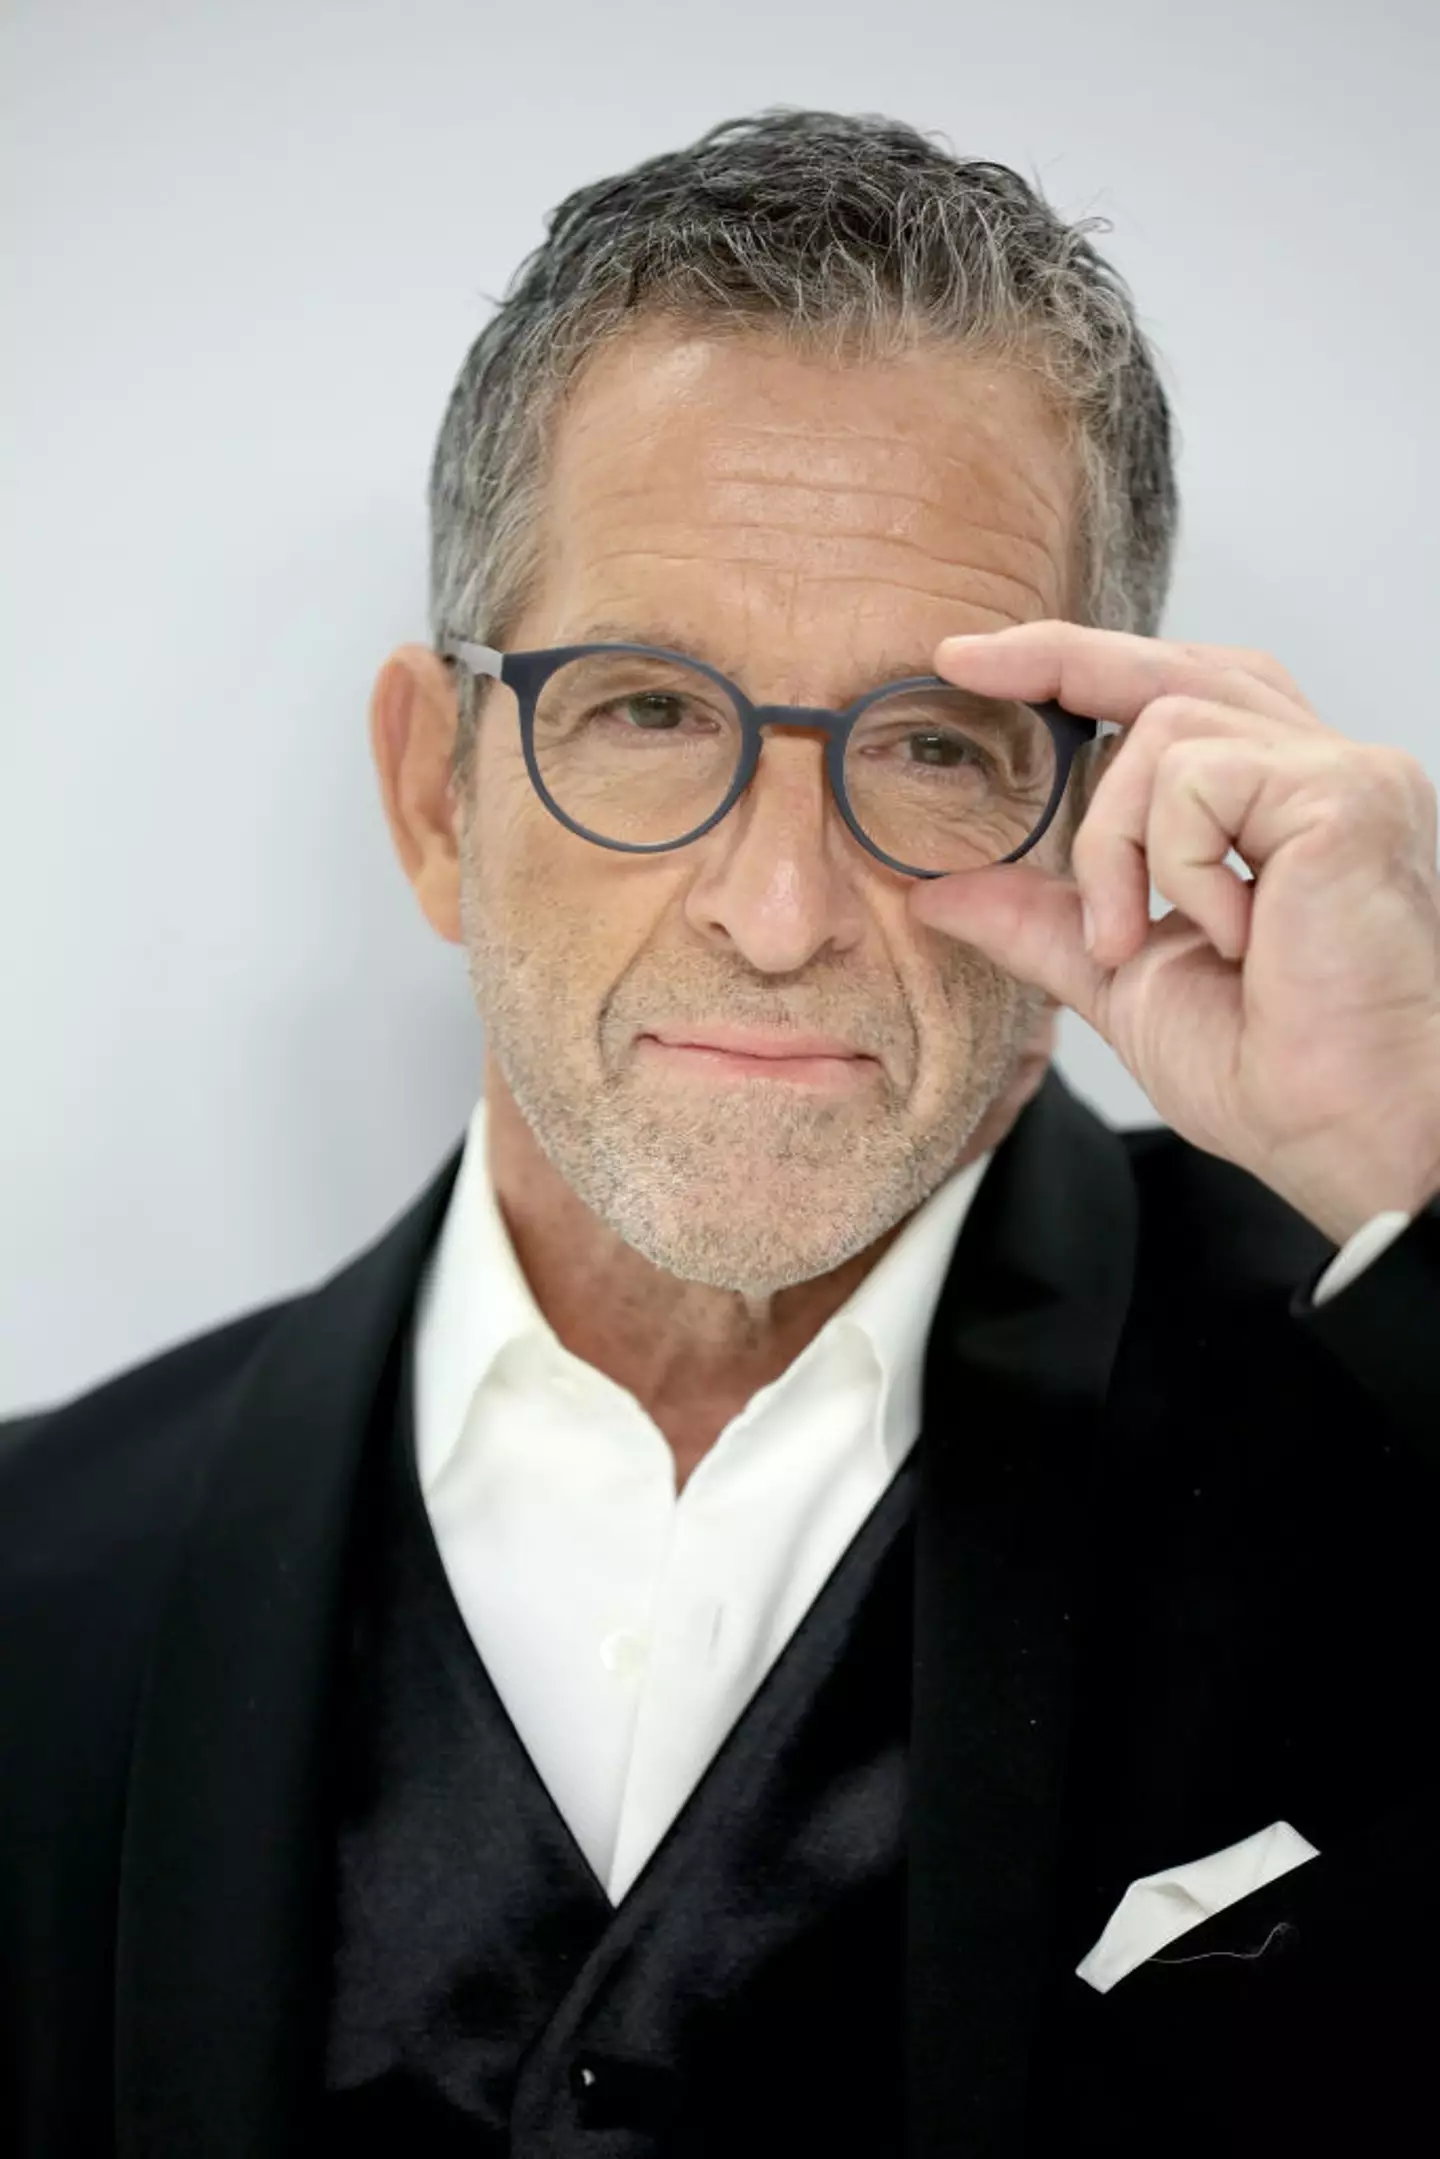 Fashion designer Kenneth Cole created Kenneth Cole Productions in 1982. (Dimitrios Kambouris/Getty Images)